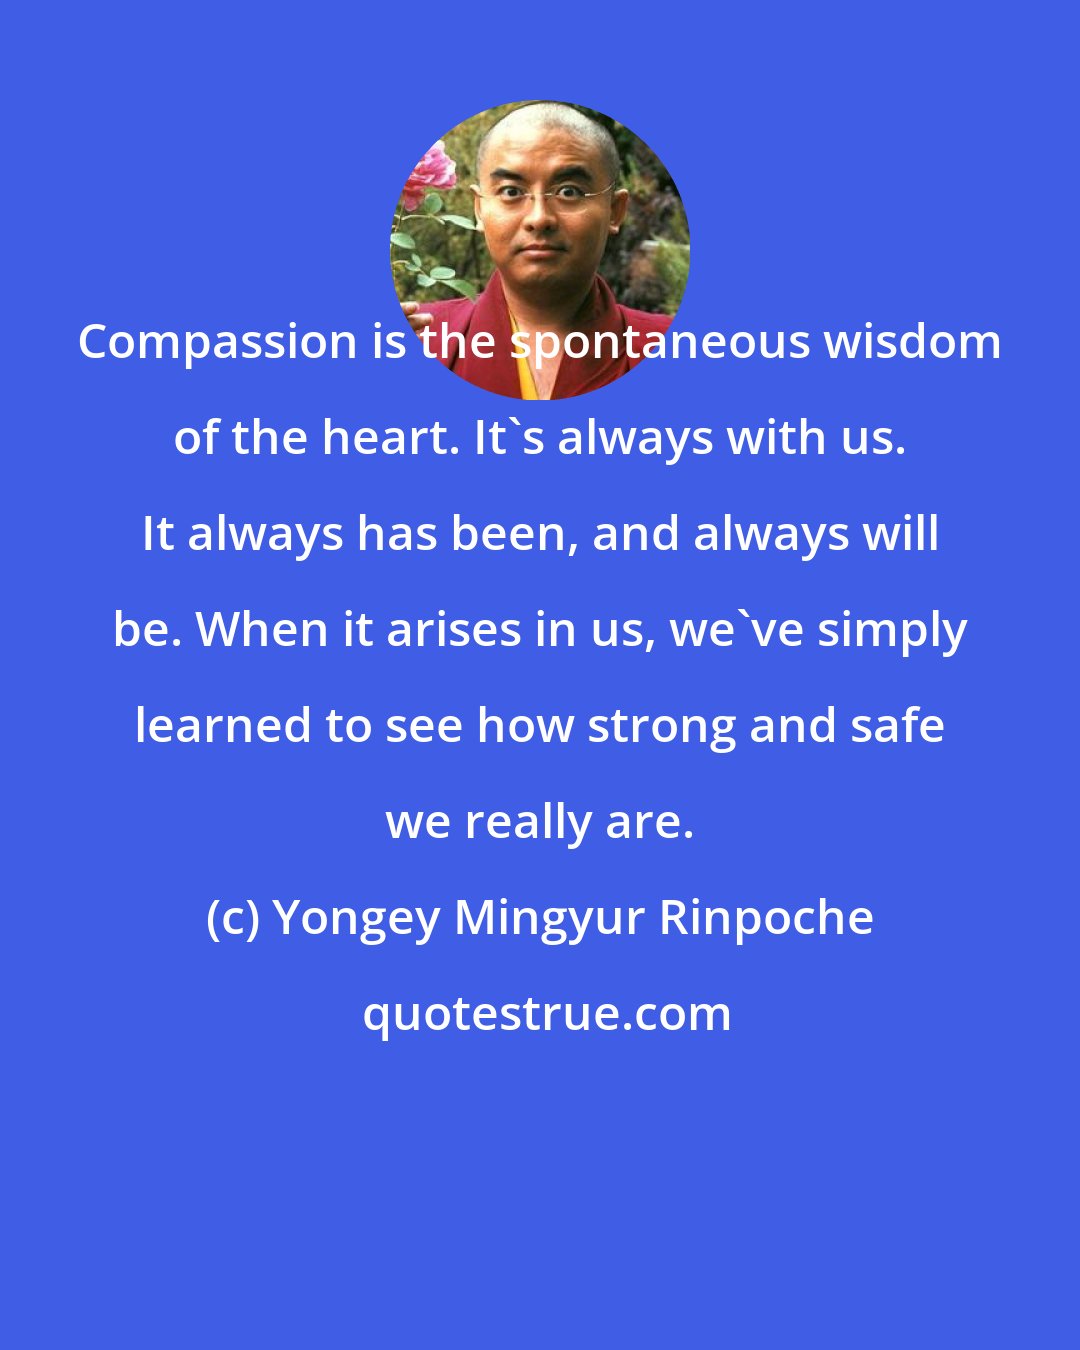 Yongey Mingyur Rinpoche: Compassion is the spontaneous wisdom of the heart. It's always with us. It always has been, and always will be. When it arises in us, we've simply learned to see how strong and safe we really are.